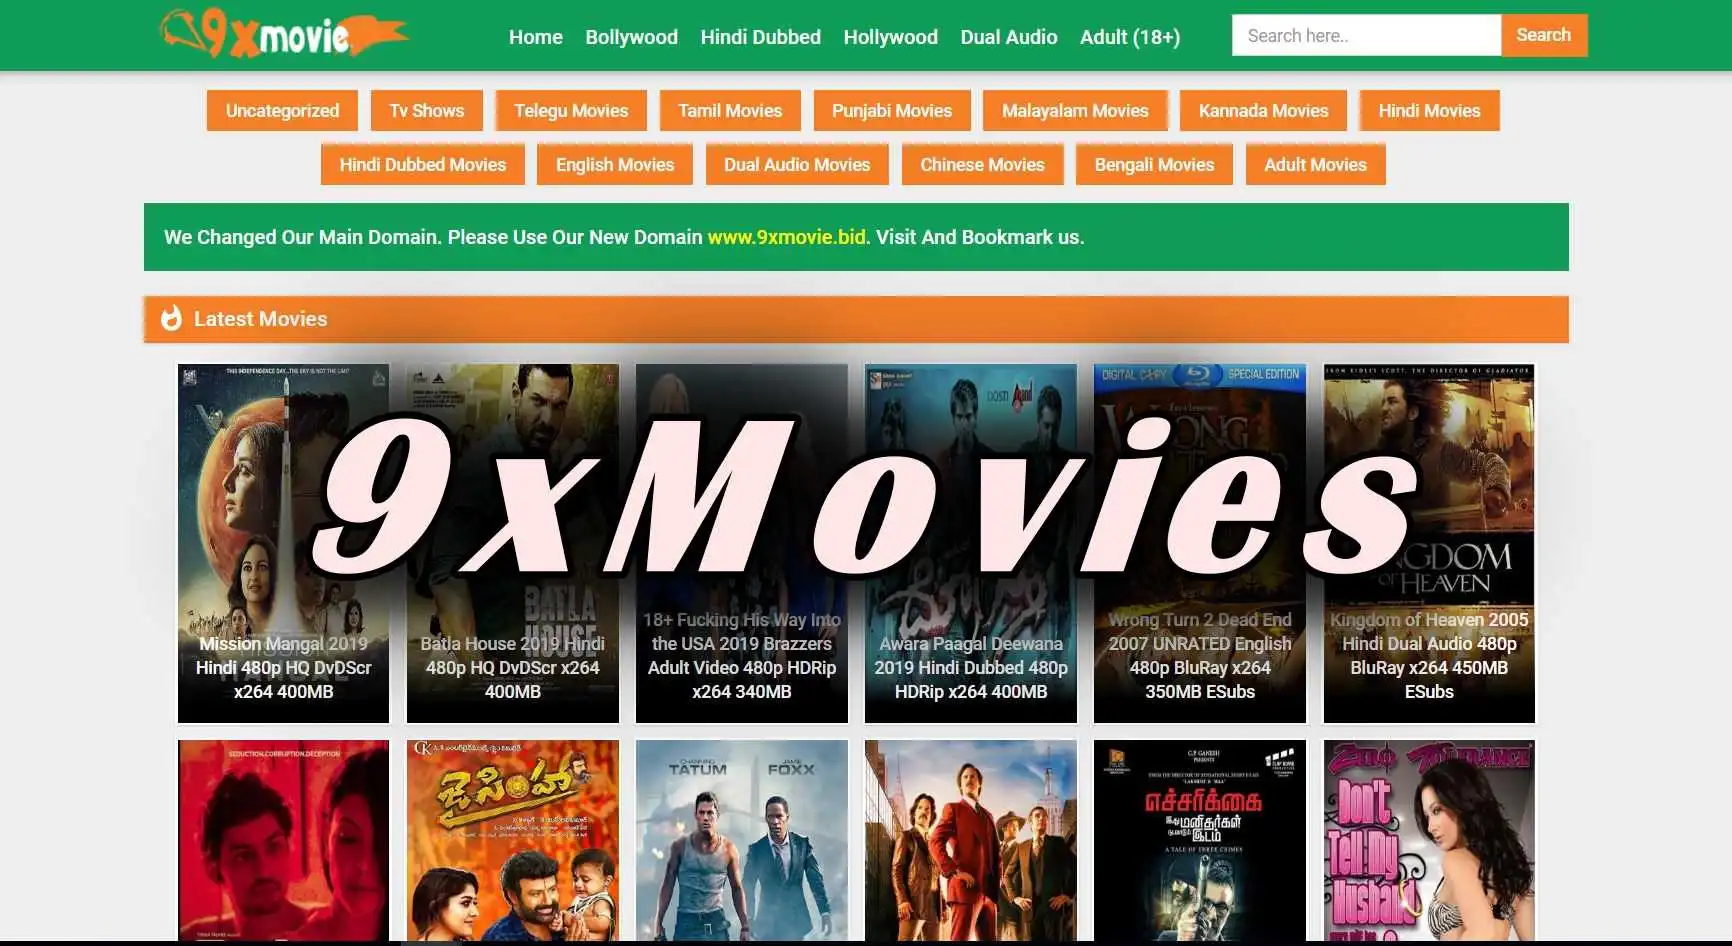 Watch Free Movies Online With a 9xmovies Card